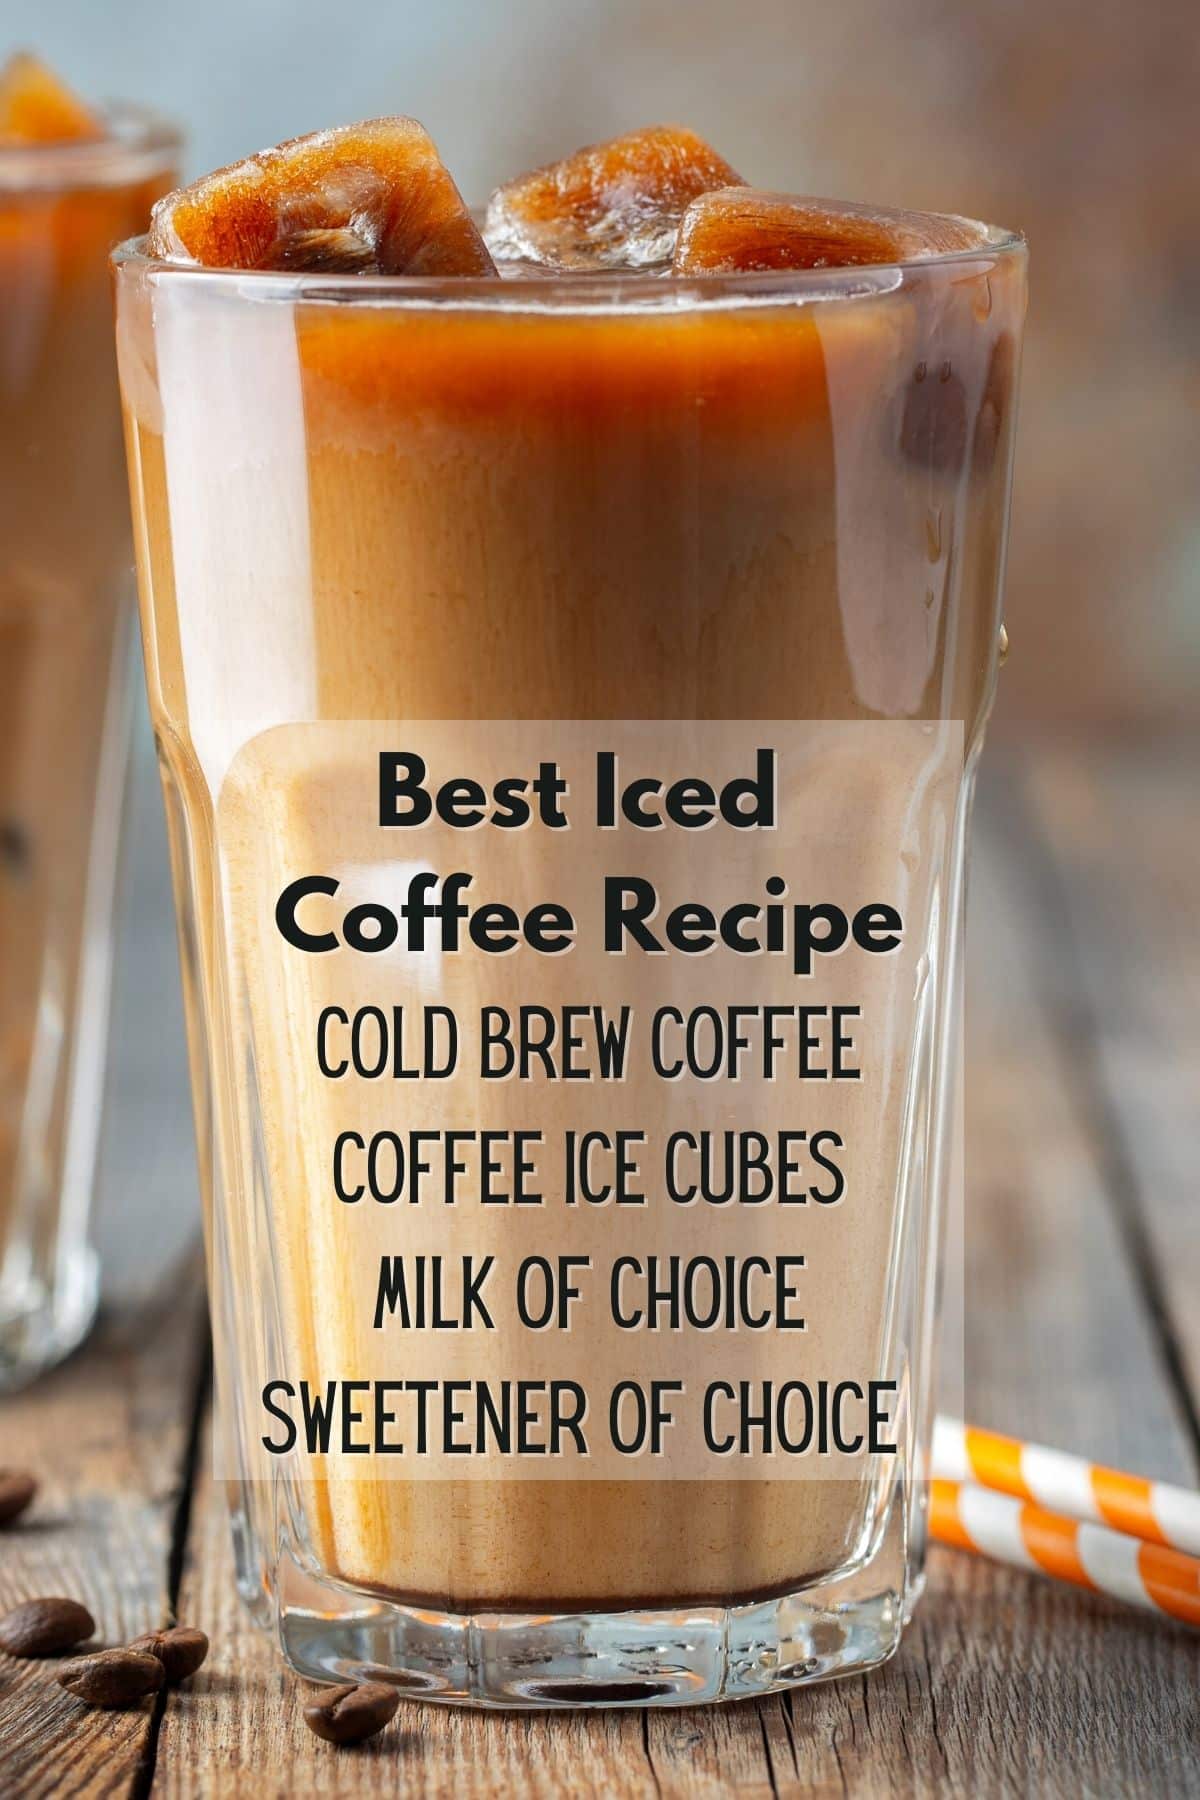 best iced coffee infographic with ingredients to make it.